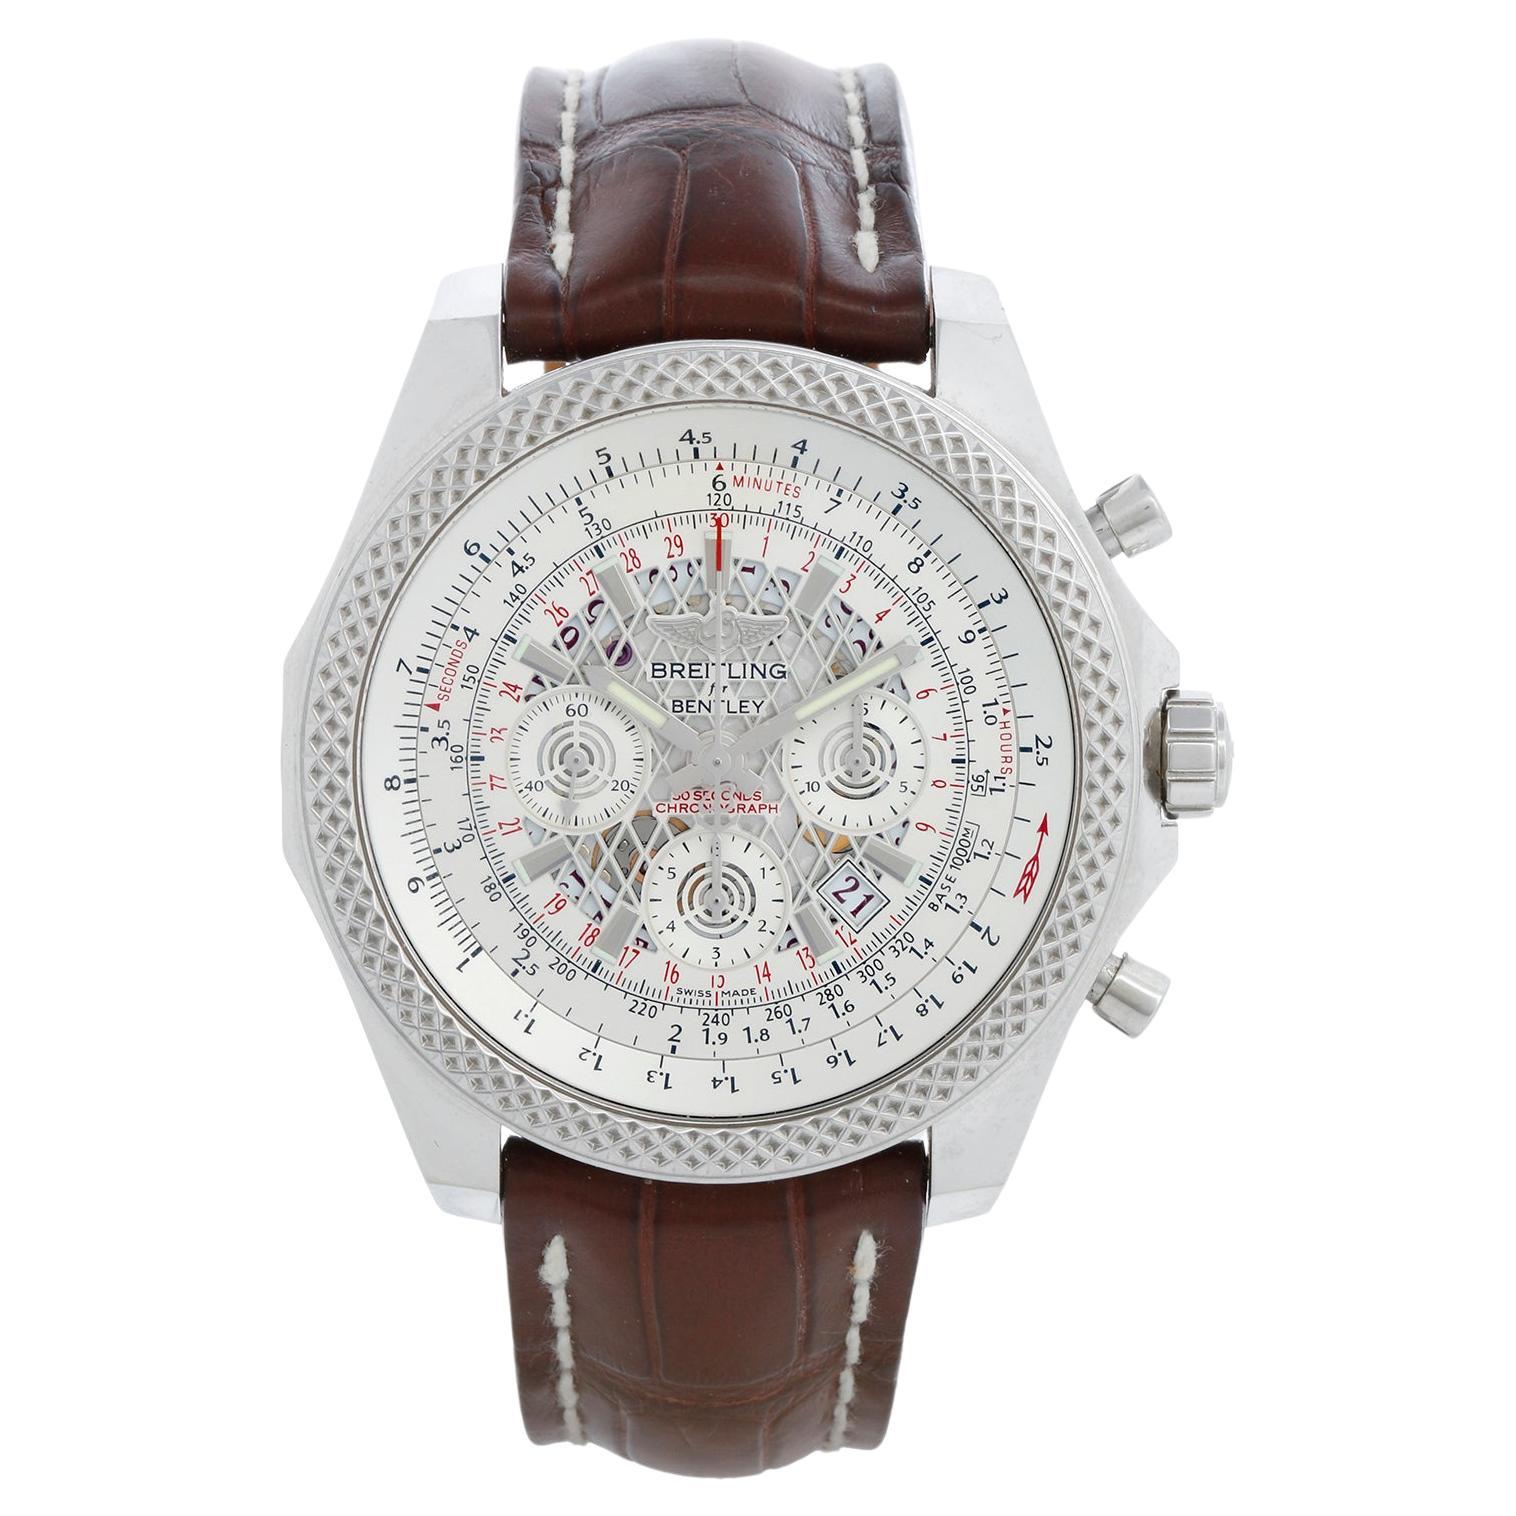 Breitling Bentley Chronograph Men's Steel Watch Silver Dial AB0611 For Sale